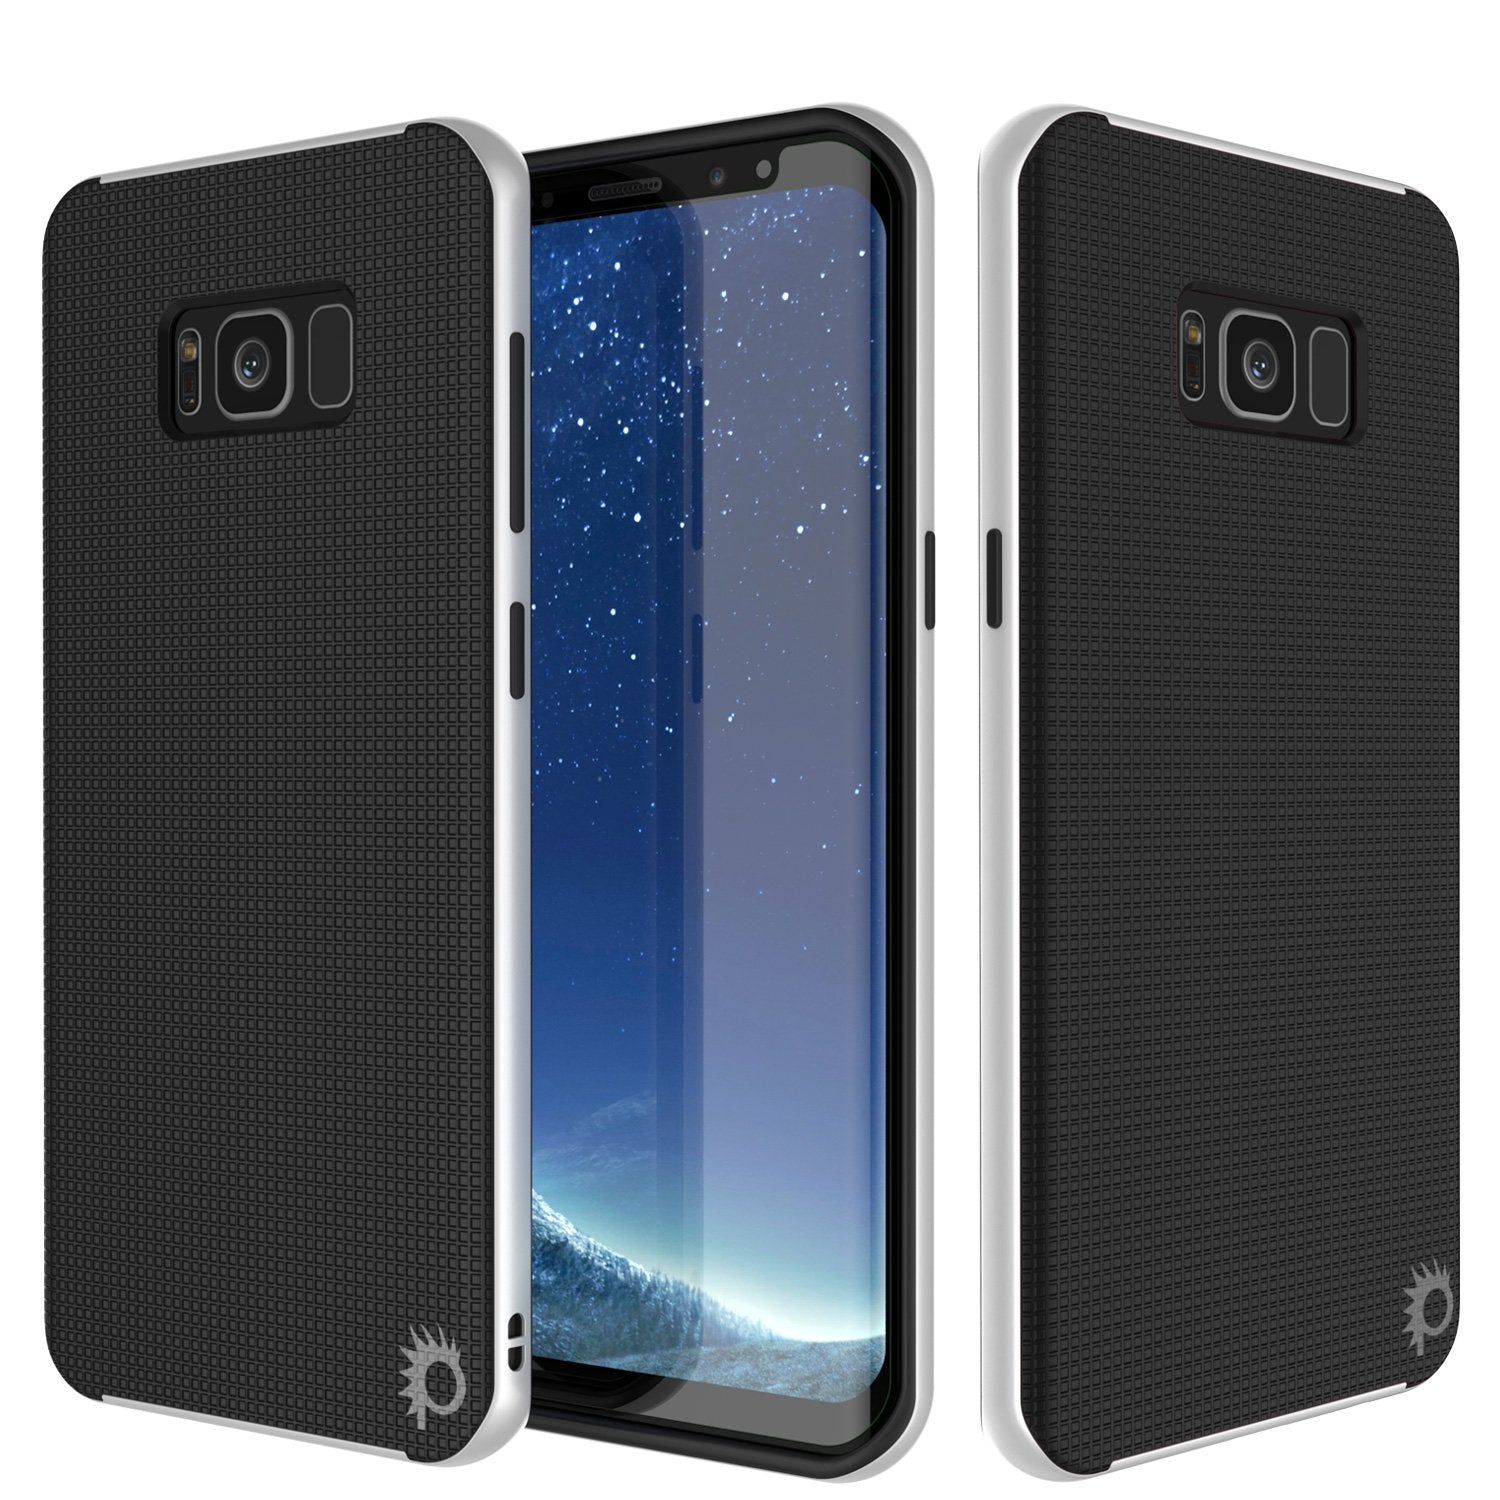 Galaxy S8 Case, PunkCase [Stealth Series] Hybrid 3-Piece Shockproof Dual Layer Cover [Non-Slip] [Soft TPU + PC Bumper] with PUNKSHIELD Screen Protector for Samsung S8 Edge [White] - PunkCase NZ